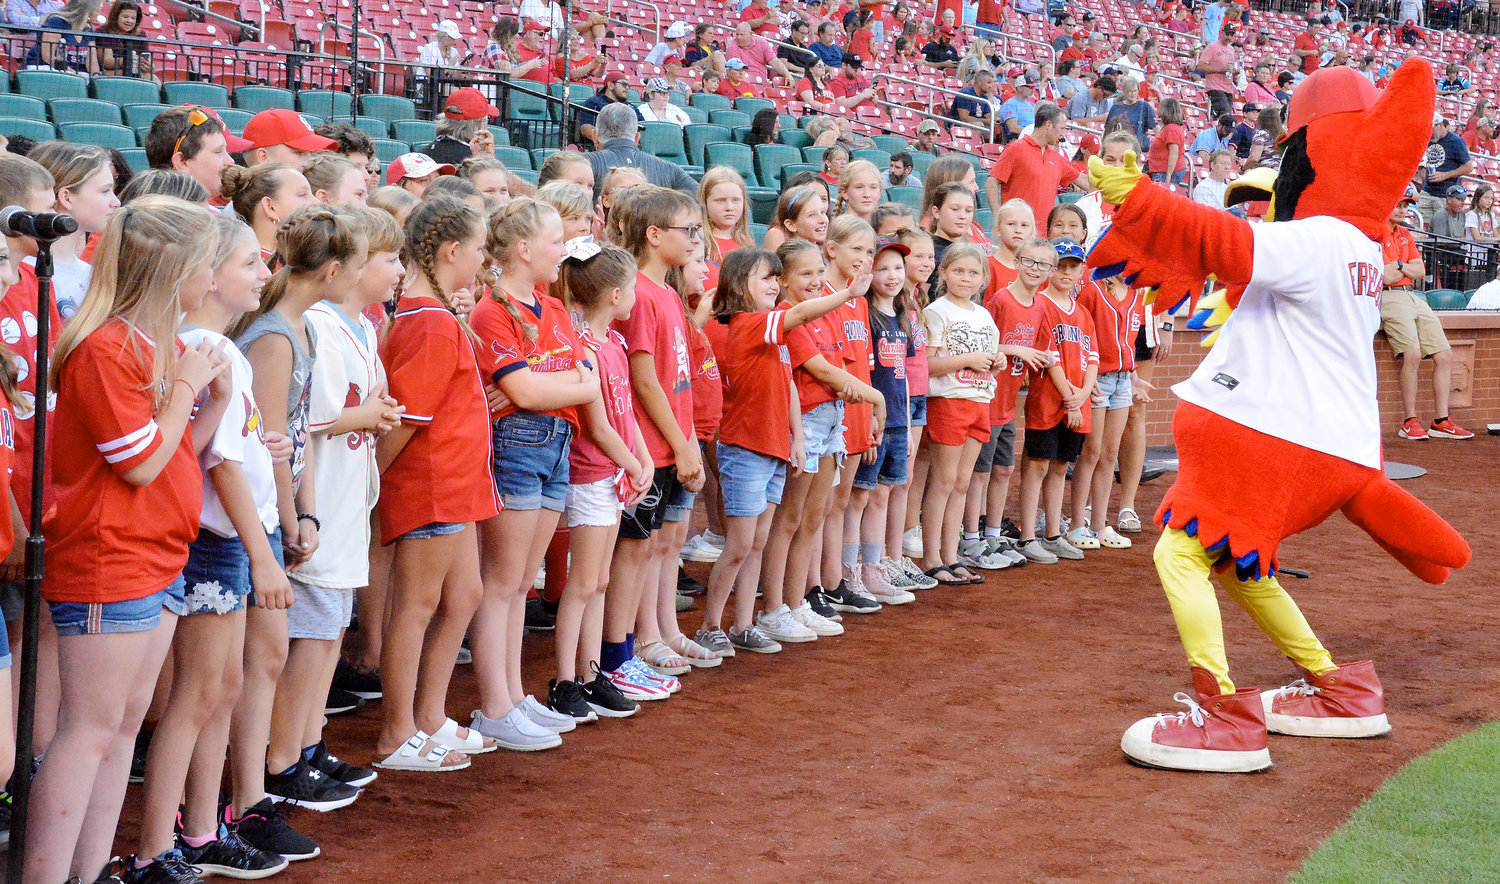 Owensville Elementary School (OES) and Gerald Elementary School (GES) choir students watch St. Louis Cardinals mascot Fredbird entertain them prior to their singing.